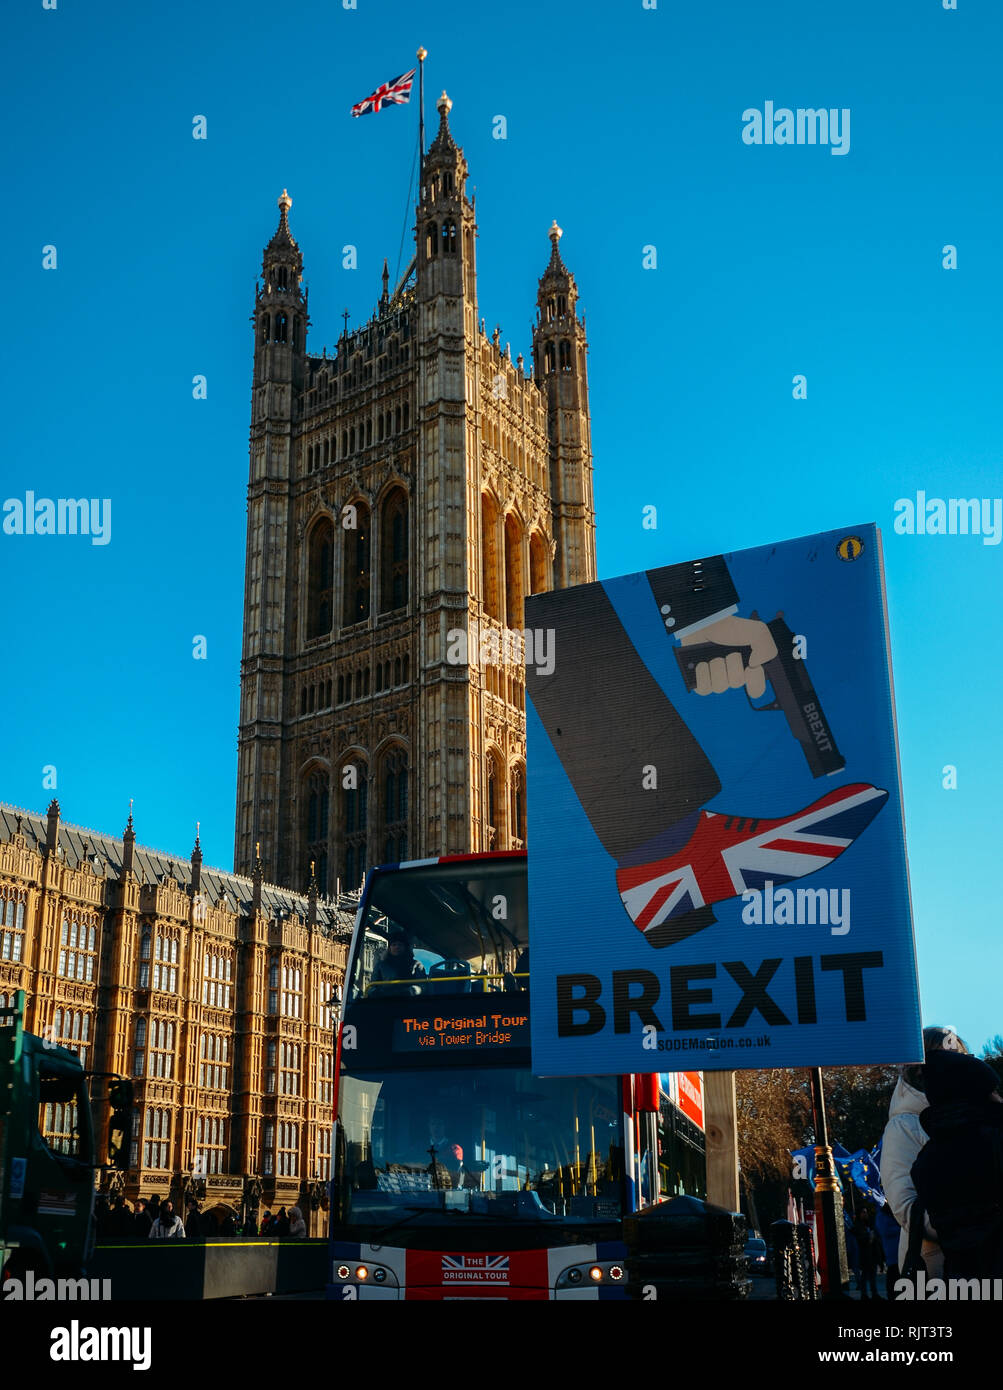 London, UK - Feb 7, 2019: Anti-Brexit placard outside, Westminster, London, UK depicting Brexit as shooting the UK in the foot with double-decker bus painted with Union Jack colours in background Credit: Alexandre Rotenberg/Alamy Live News Stock Photo